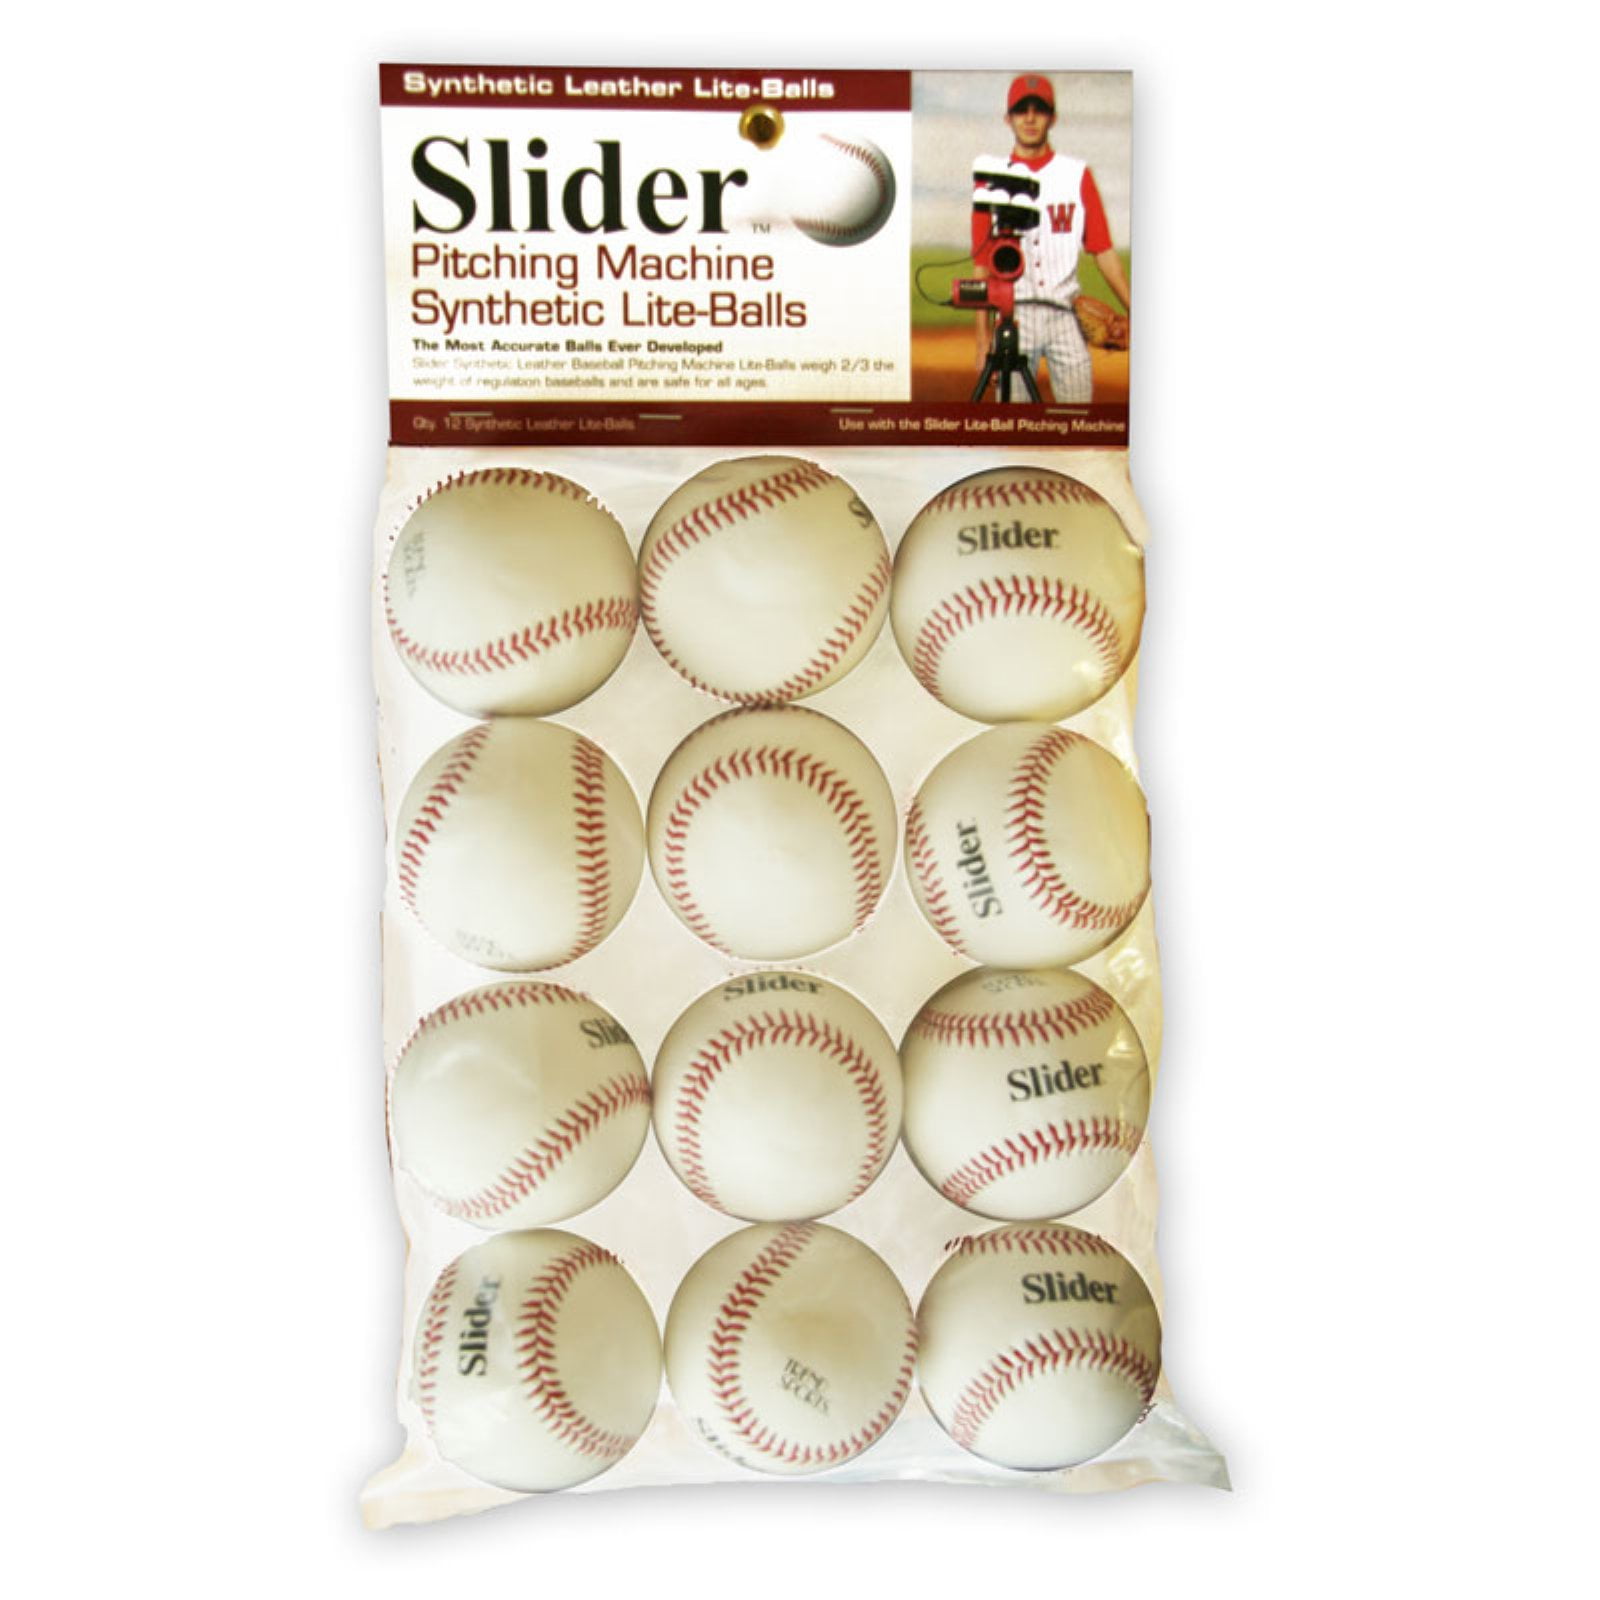 Lot of 21 ALL LEATHER practice training little big league baseballs SHIPS FREE 